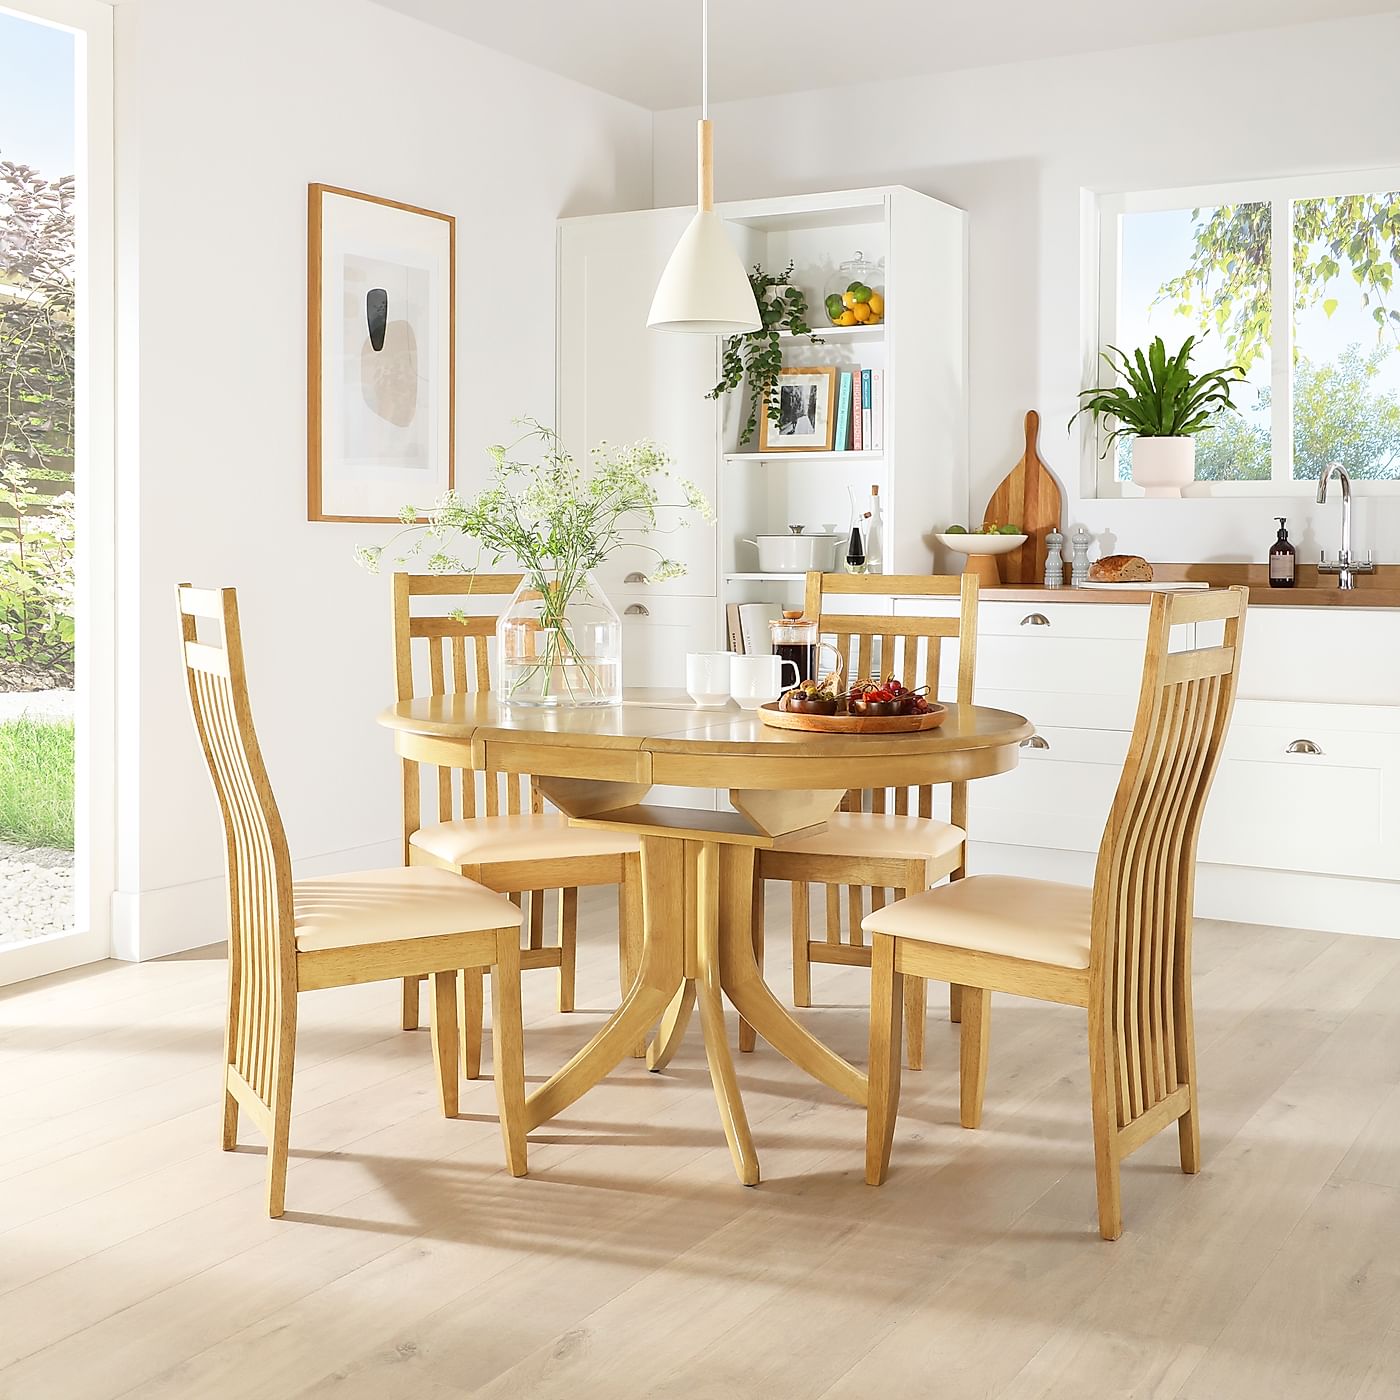 Hudson Round Oak Extending Dining Table with 4 Bali Chairs ...